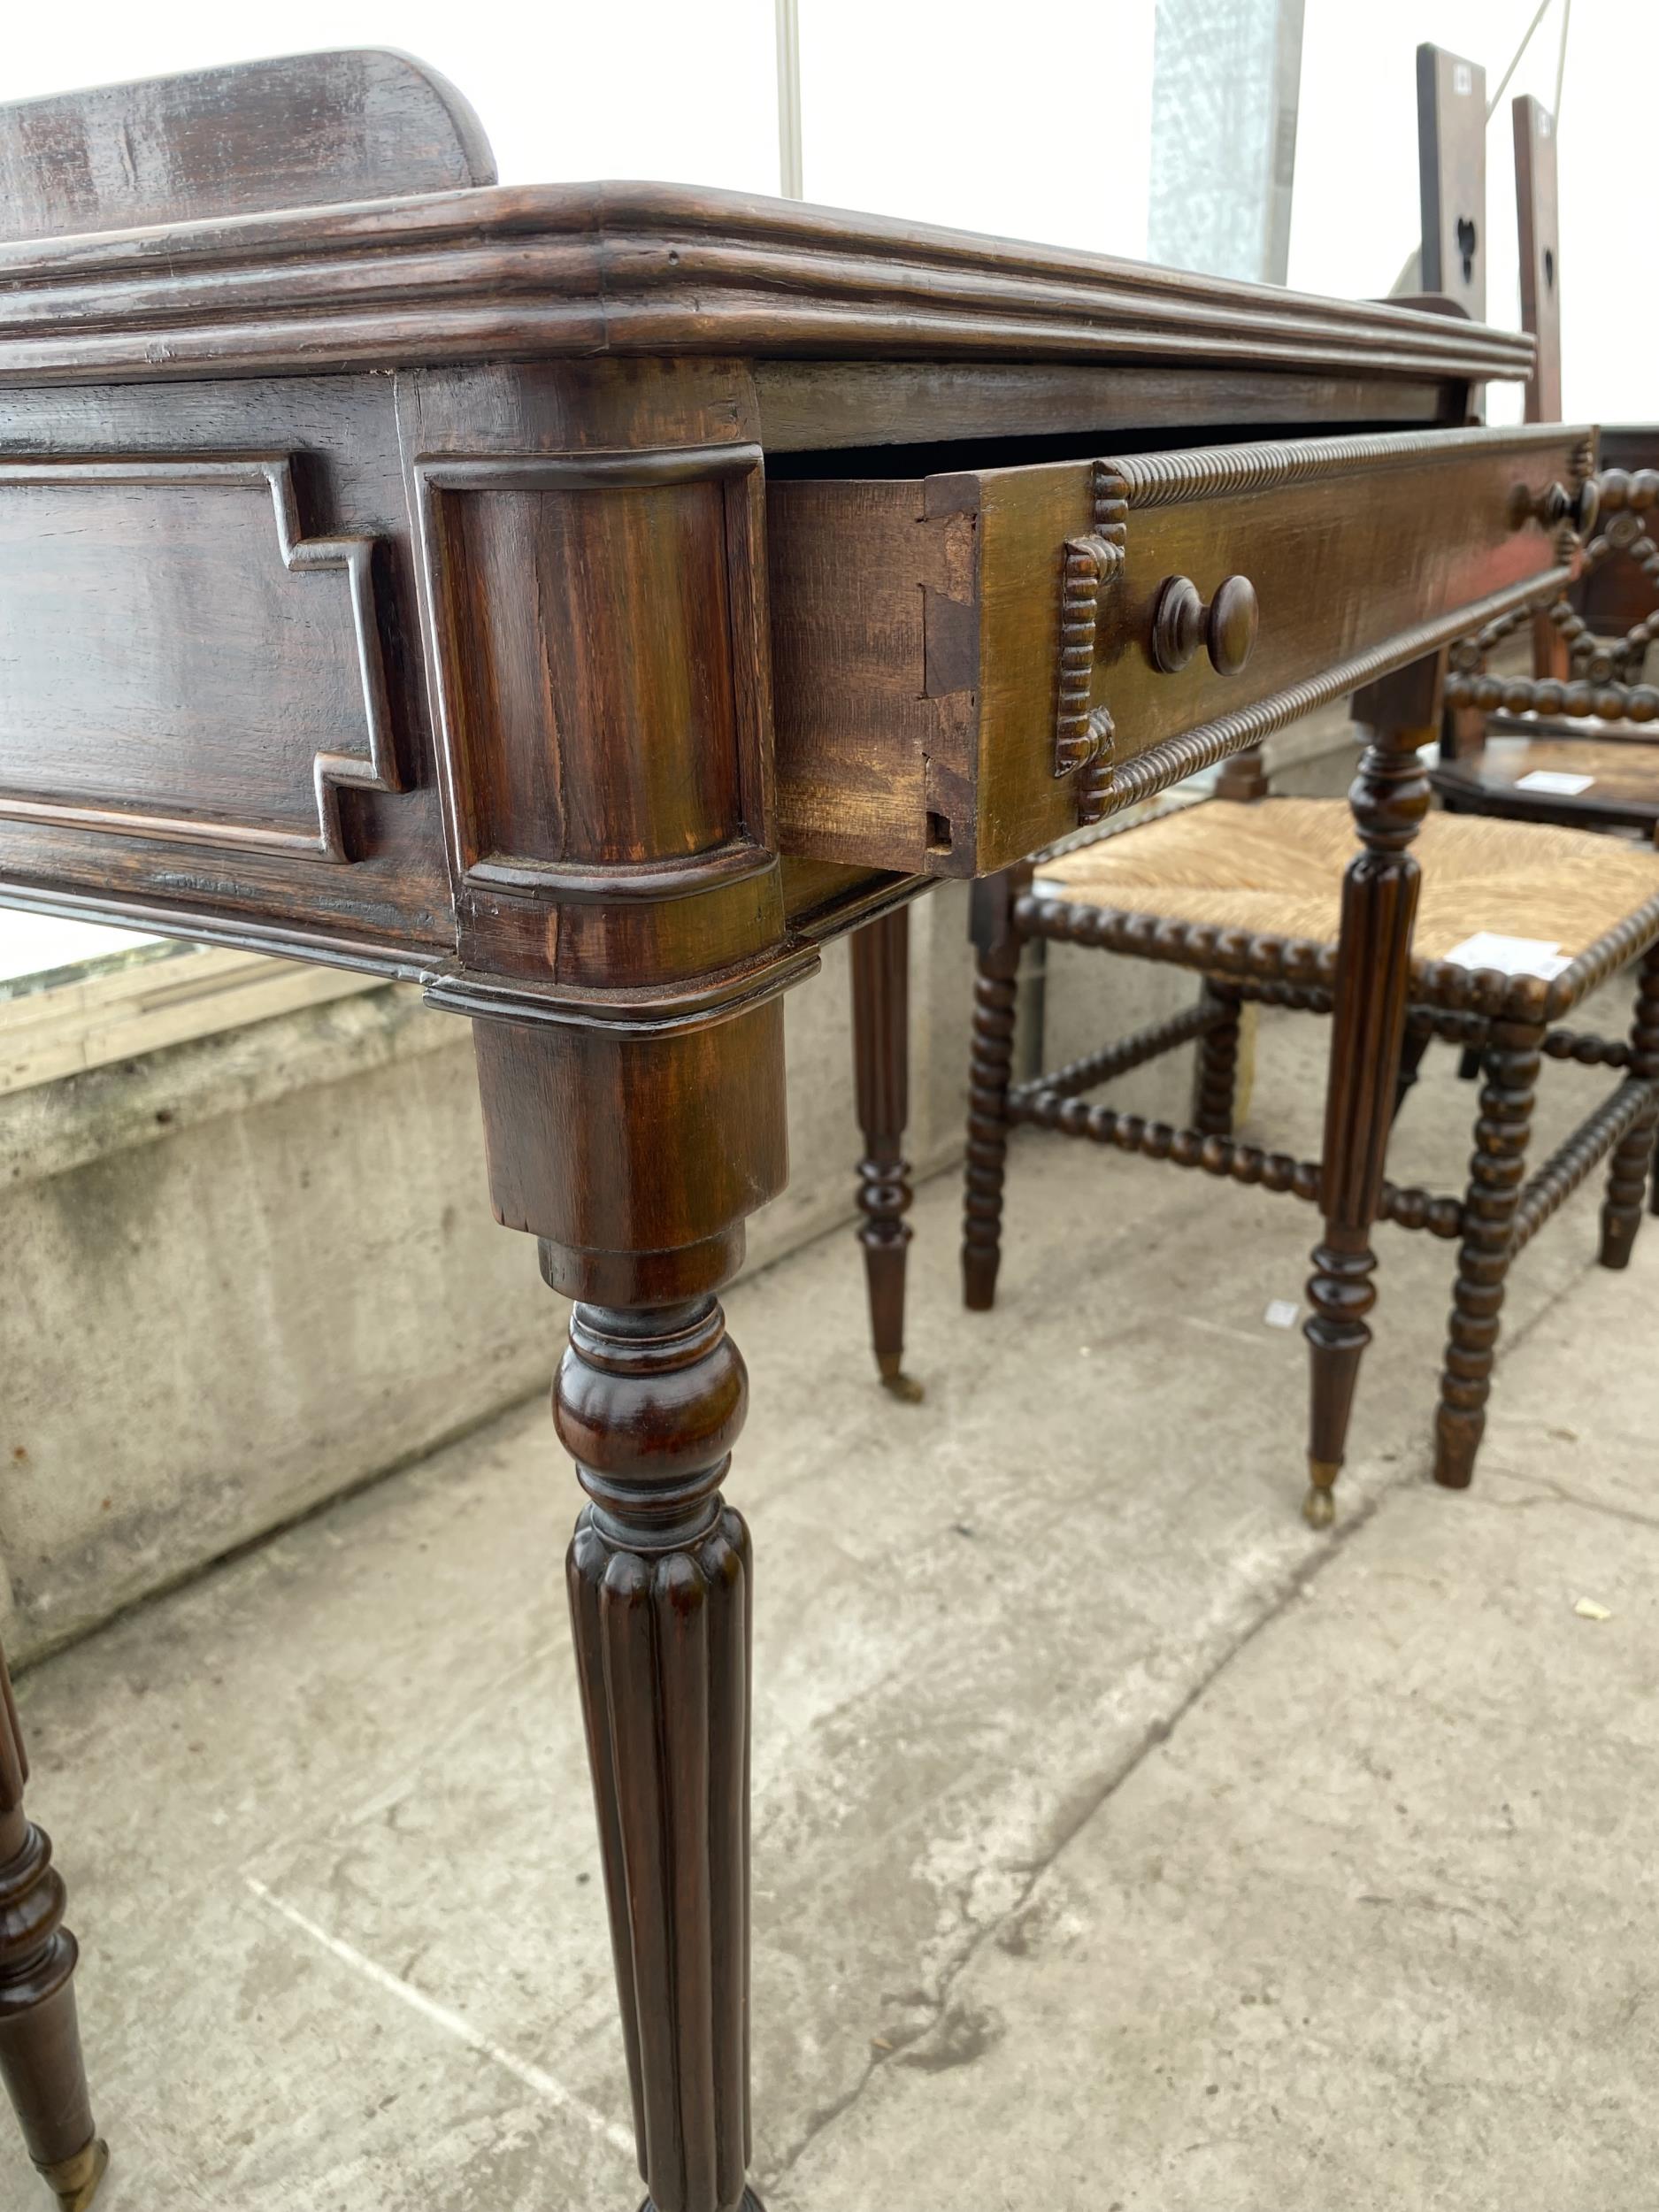 A REGENCY STYLE MAHOGANY SIDE-TABLE WITH GALLERY BACK, SINGLE DRAWER, ON TURNED AND FLUTED LEGS, 32" - Image 3 of 5